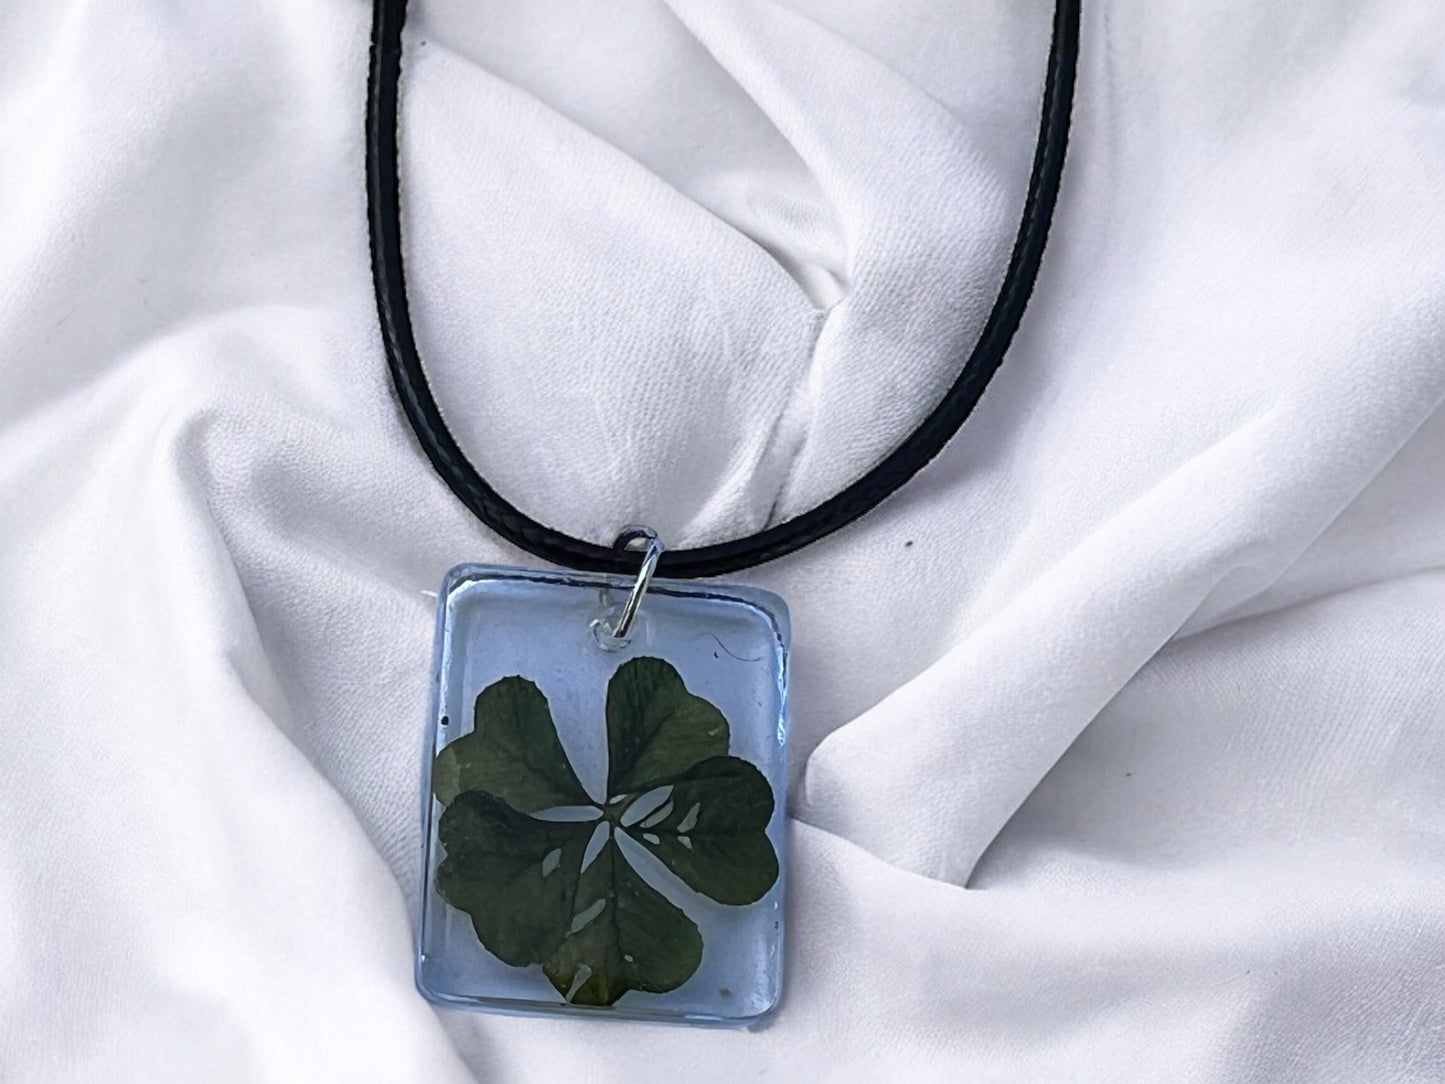 Authentic Hand Picked Four Leaf Clover Keychain/Pendant